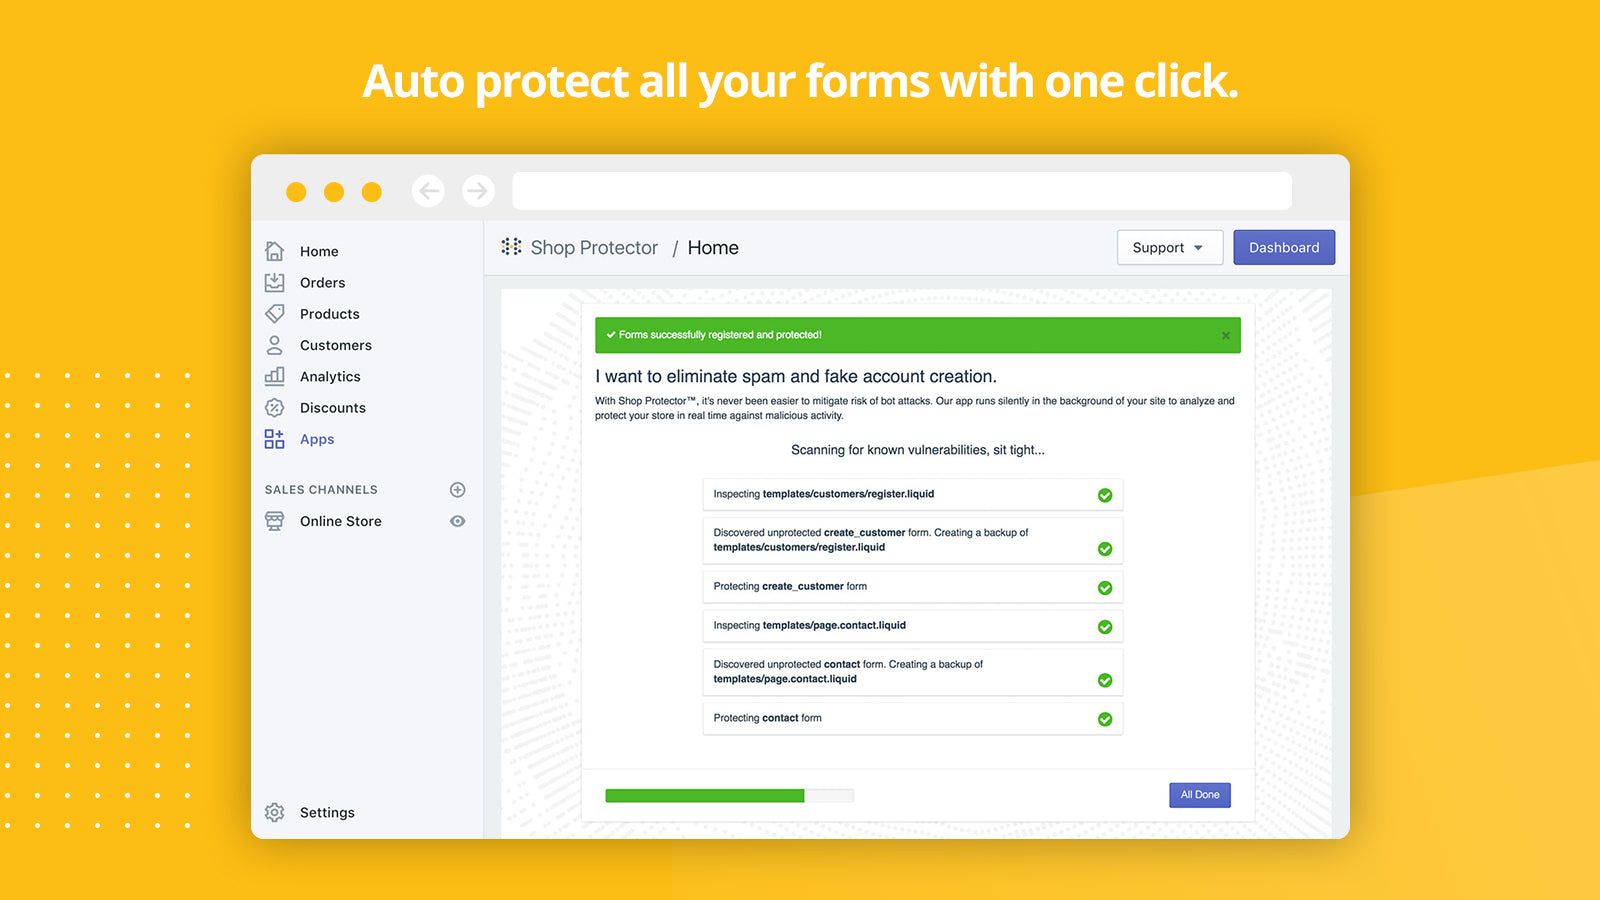 Auto protect all of your forms from spam with one click.